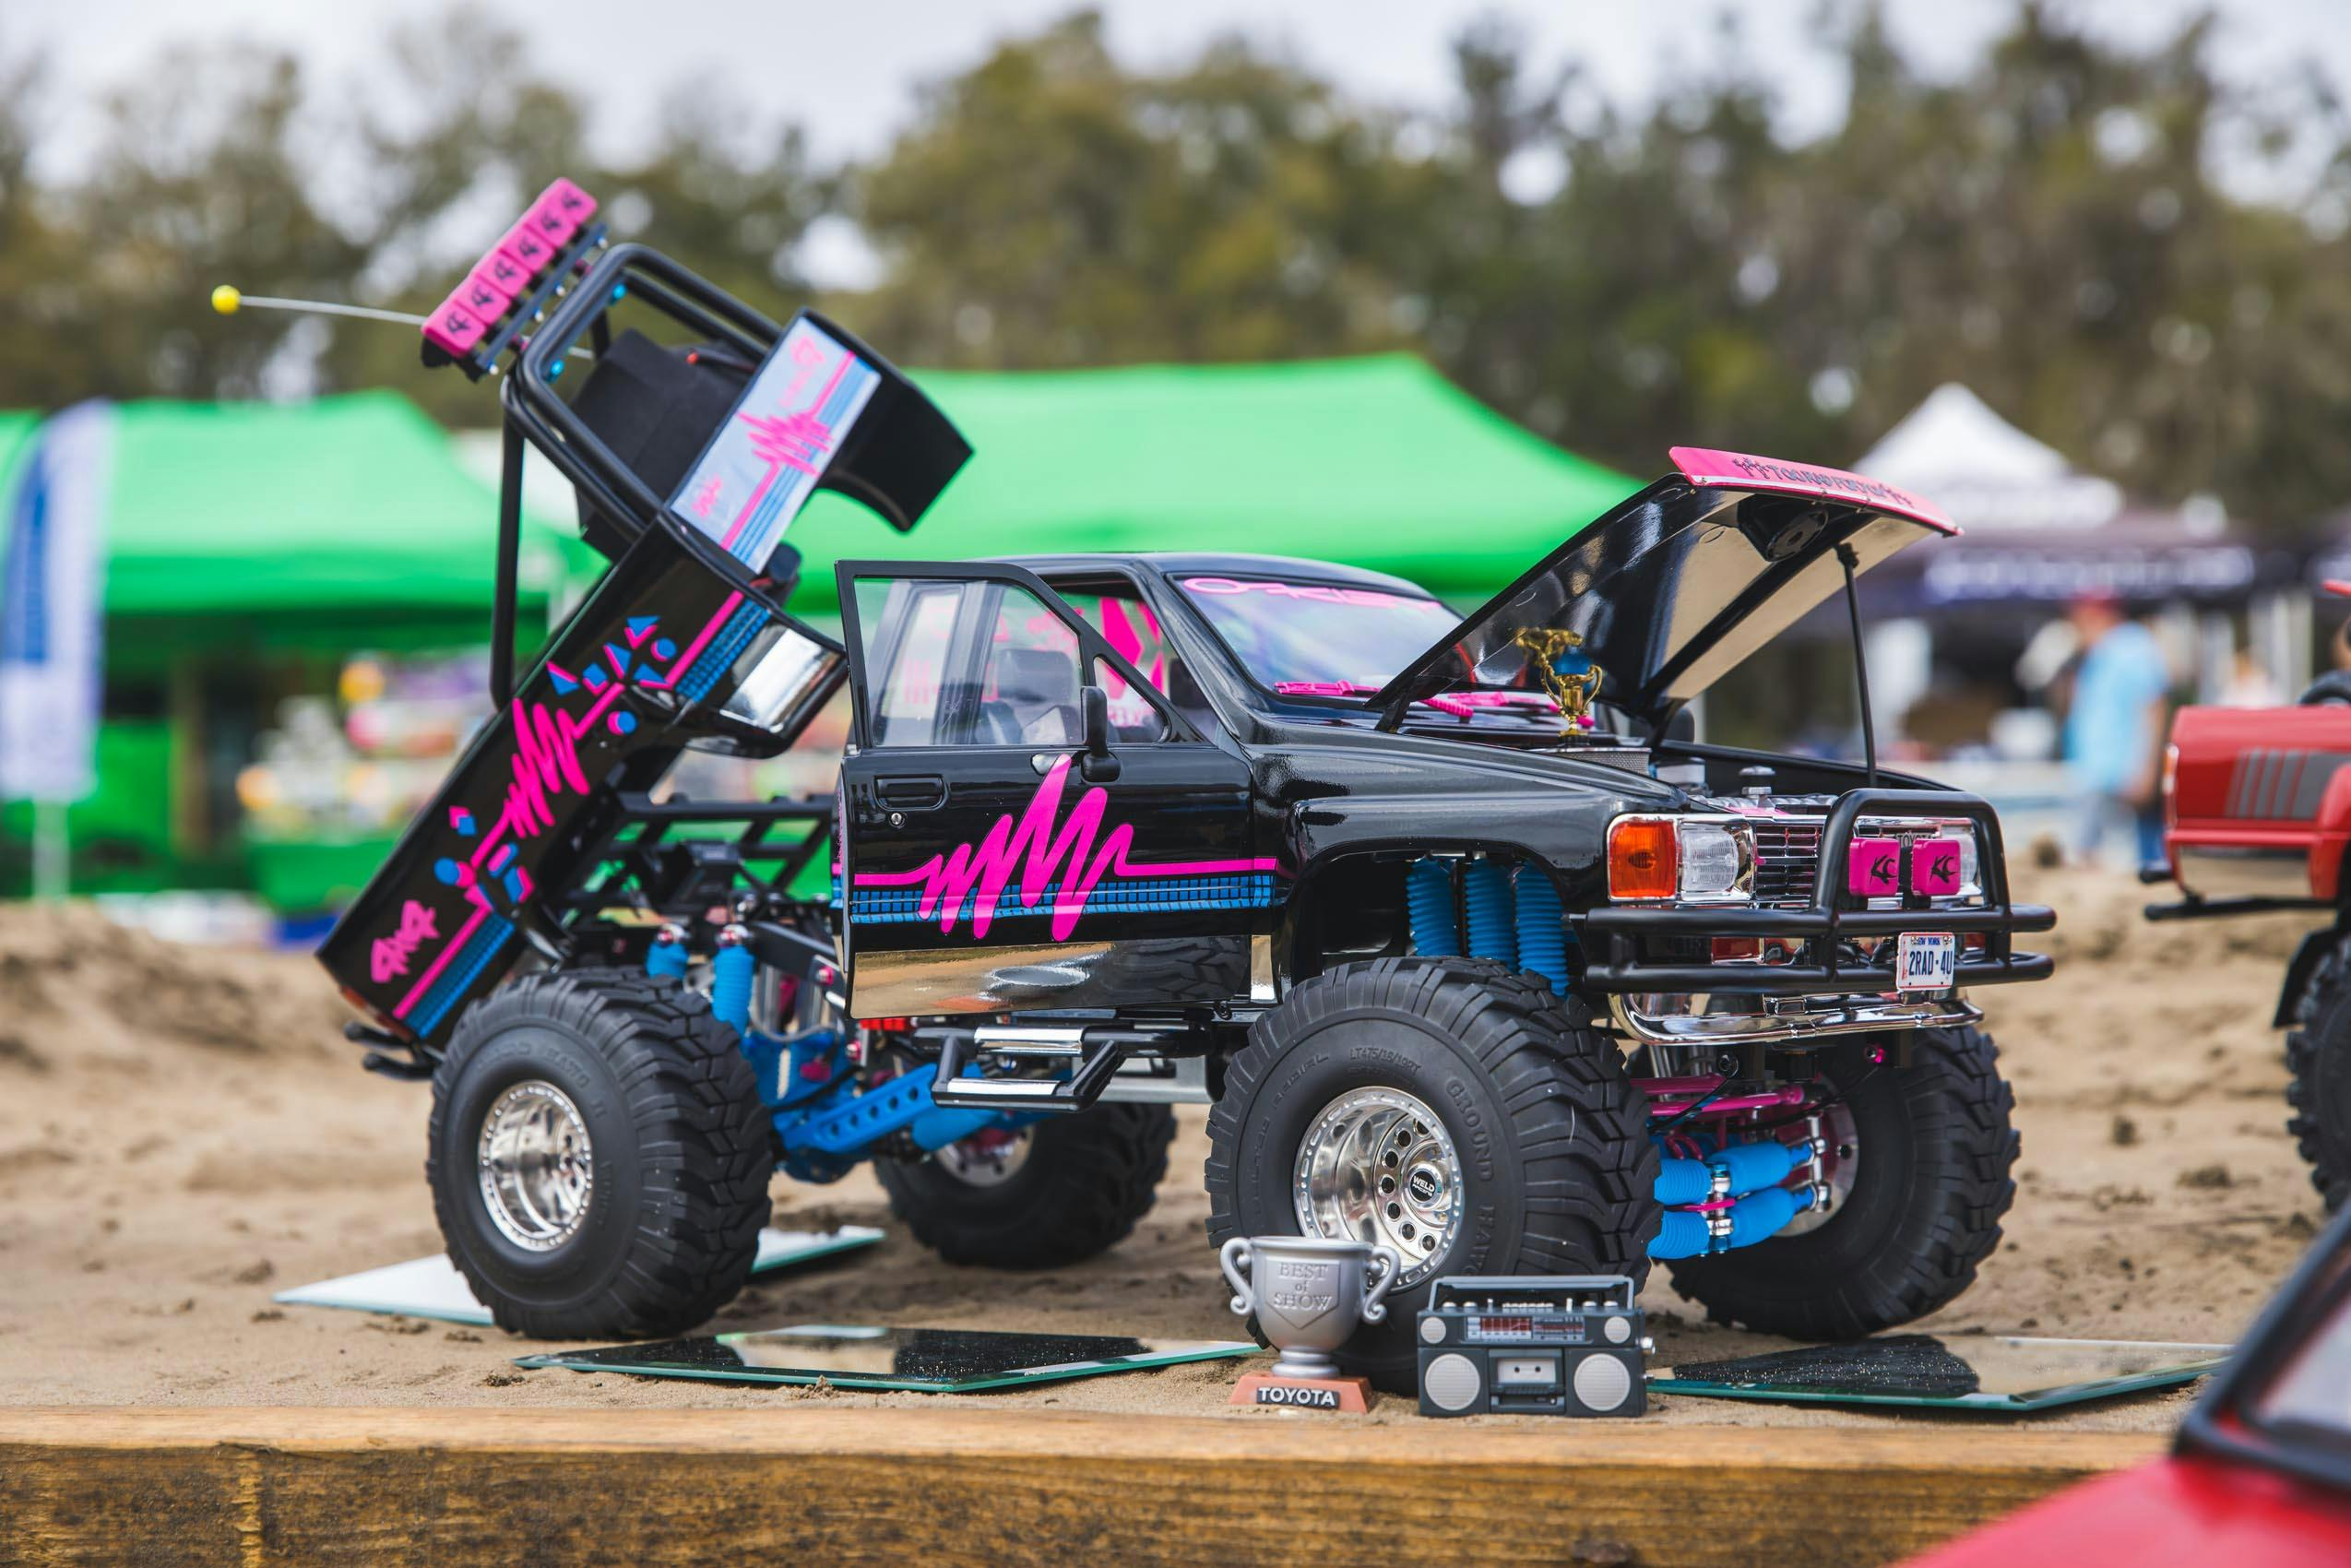 Scale RC Crawlers Too Rad Toyota pickup staged in judging area